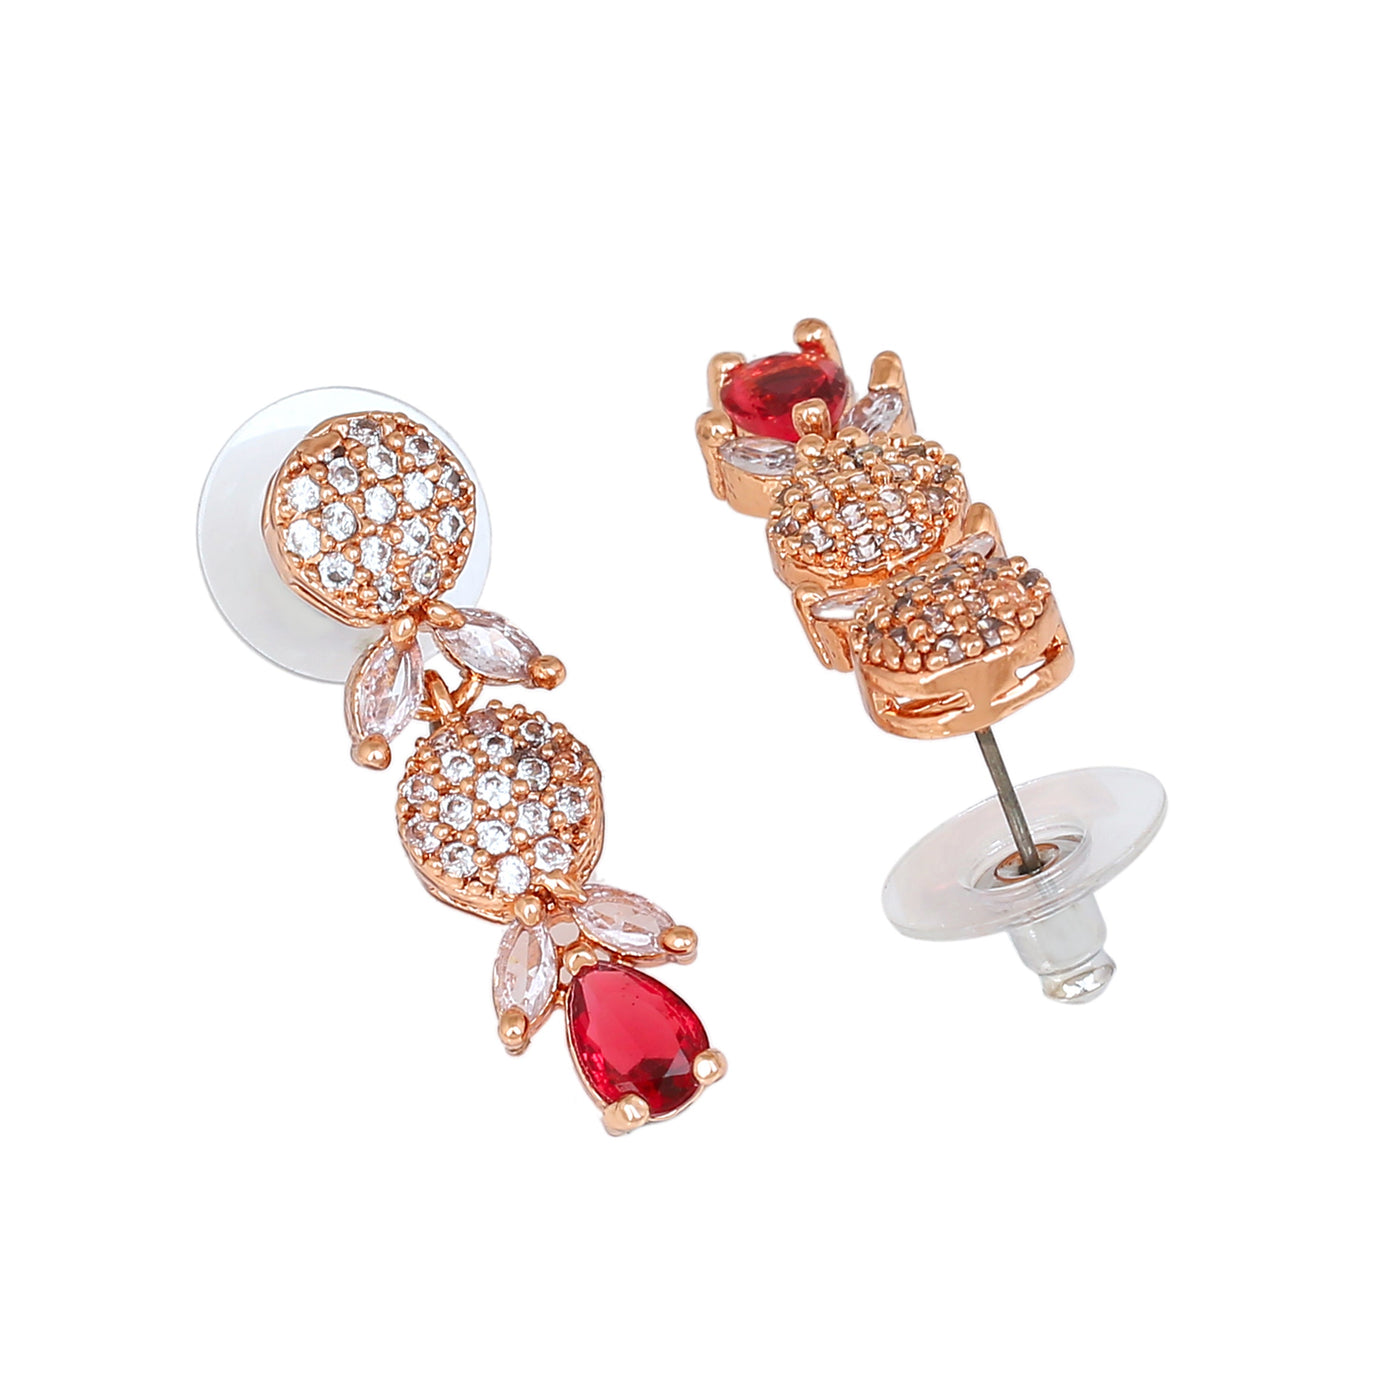 Estele Rose Gold Plated CZ Twinkling Drop Earrings with Tourmaline Pink Stones for Women